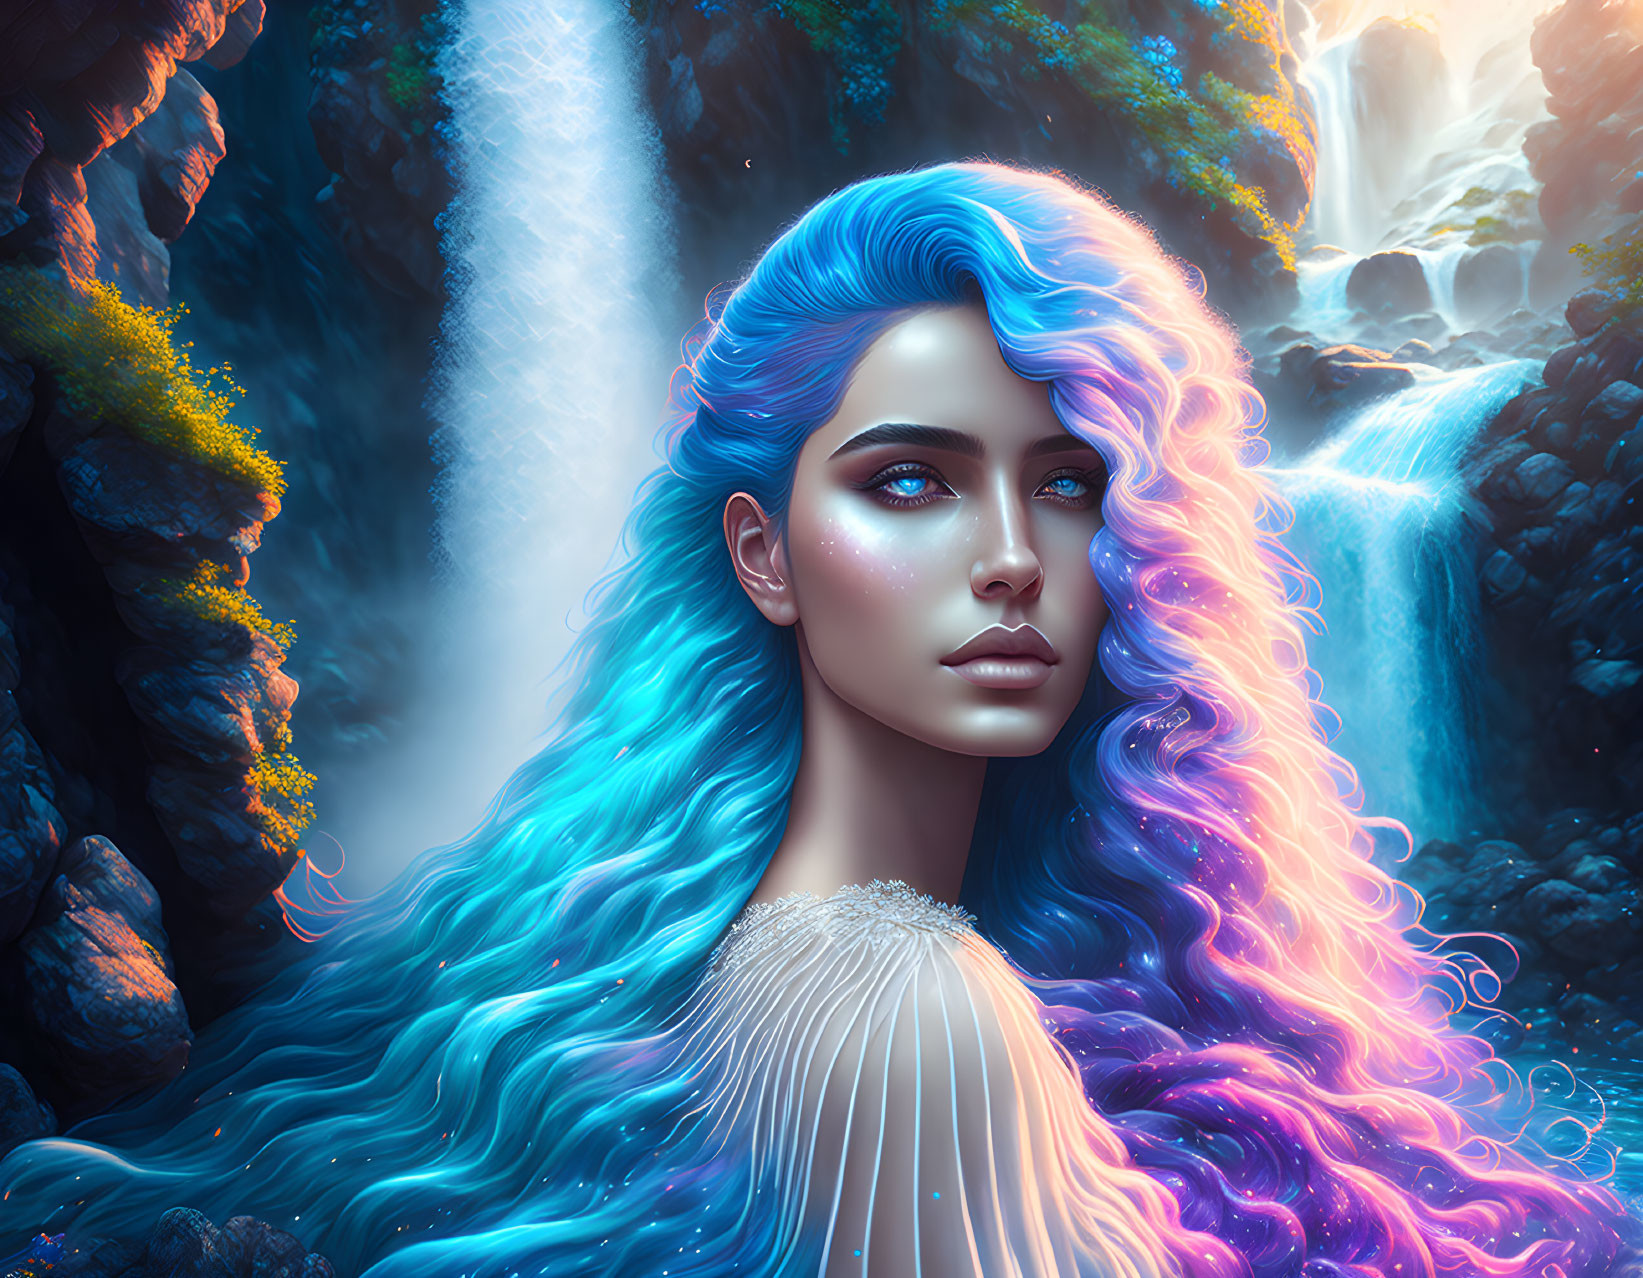 Vibrant blue and purple hair woman in surreal waterfall setting